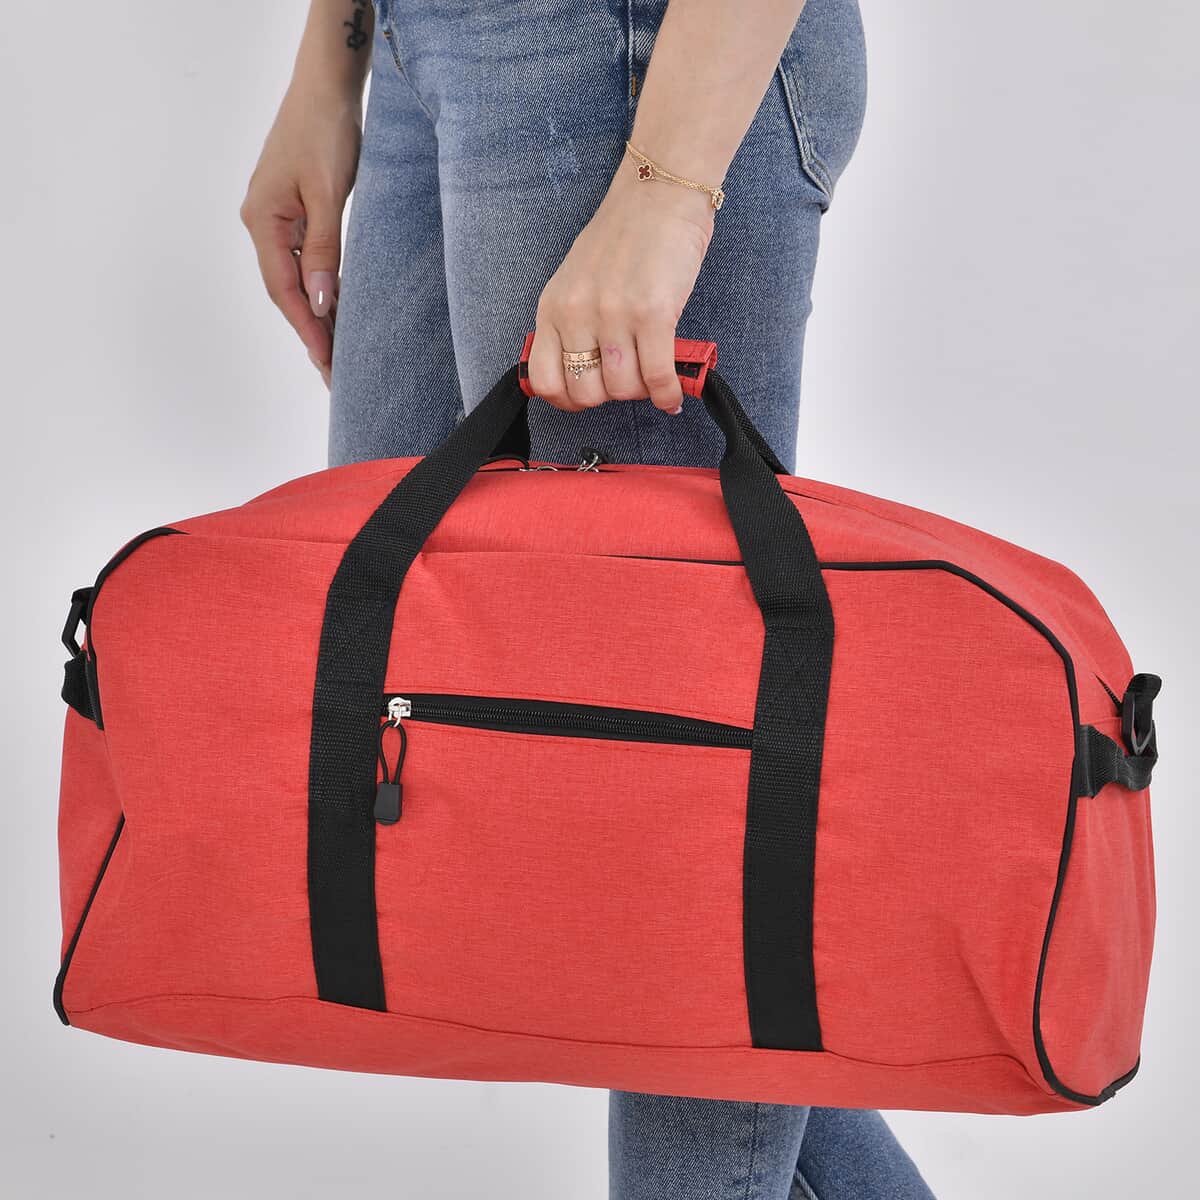 Red Weatherproof Travel Bag (20.9"x10.6"x9.8") with Handle Drop and Detachable Shoulder Strap image number 2